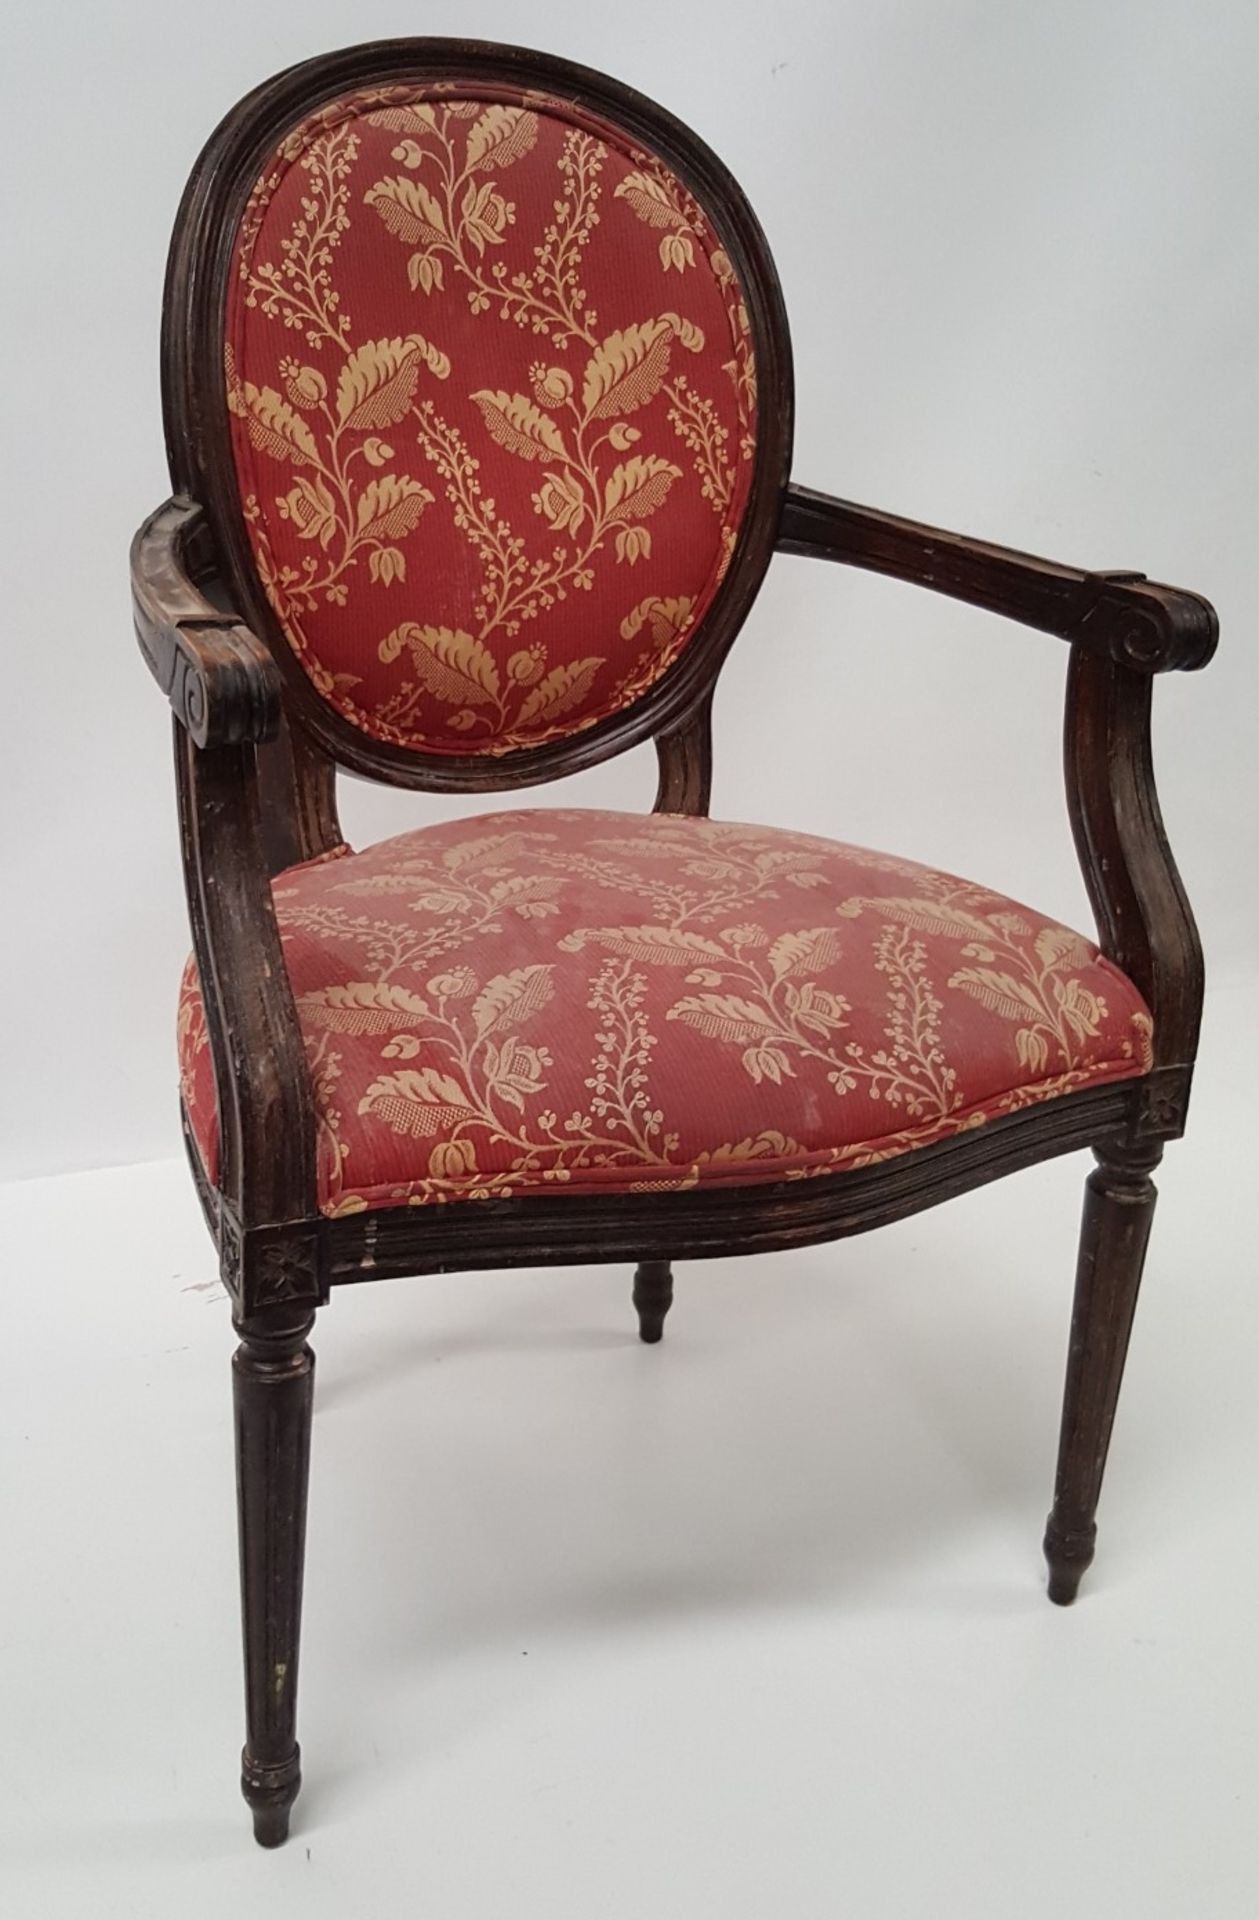 6 x Antique Style Wooden Chairs Upholstered In Red Fabric With Gold Leaf Design - CL431 - Image 5 of 8